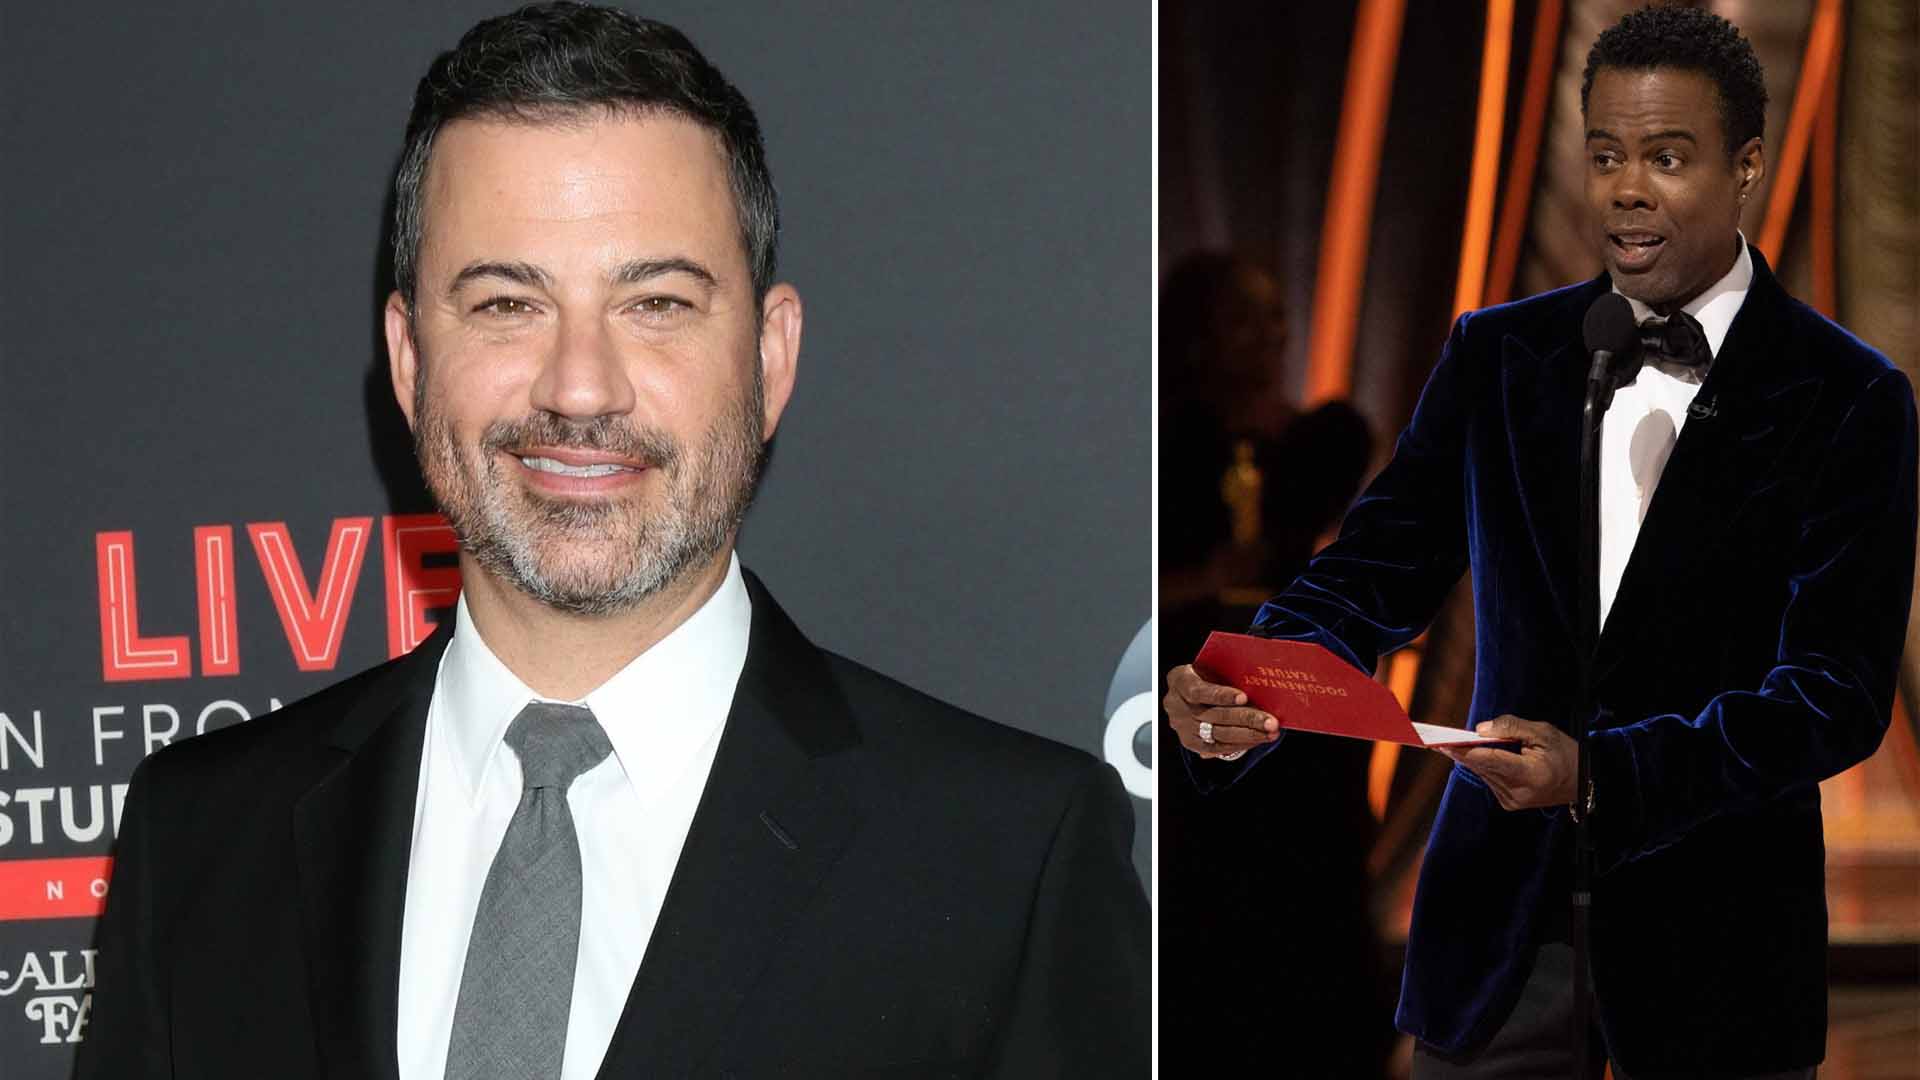 Jimmy Kimmel Weighs In On Will Smith Slapping Chris Rock At The Oscars: "Nobody Lifted a Finger! Spider-Man Was There!"